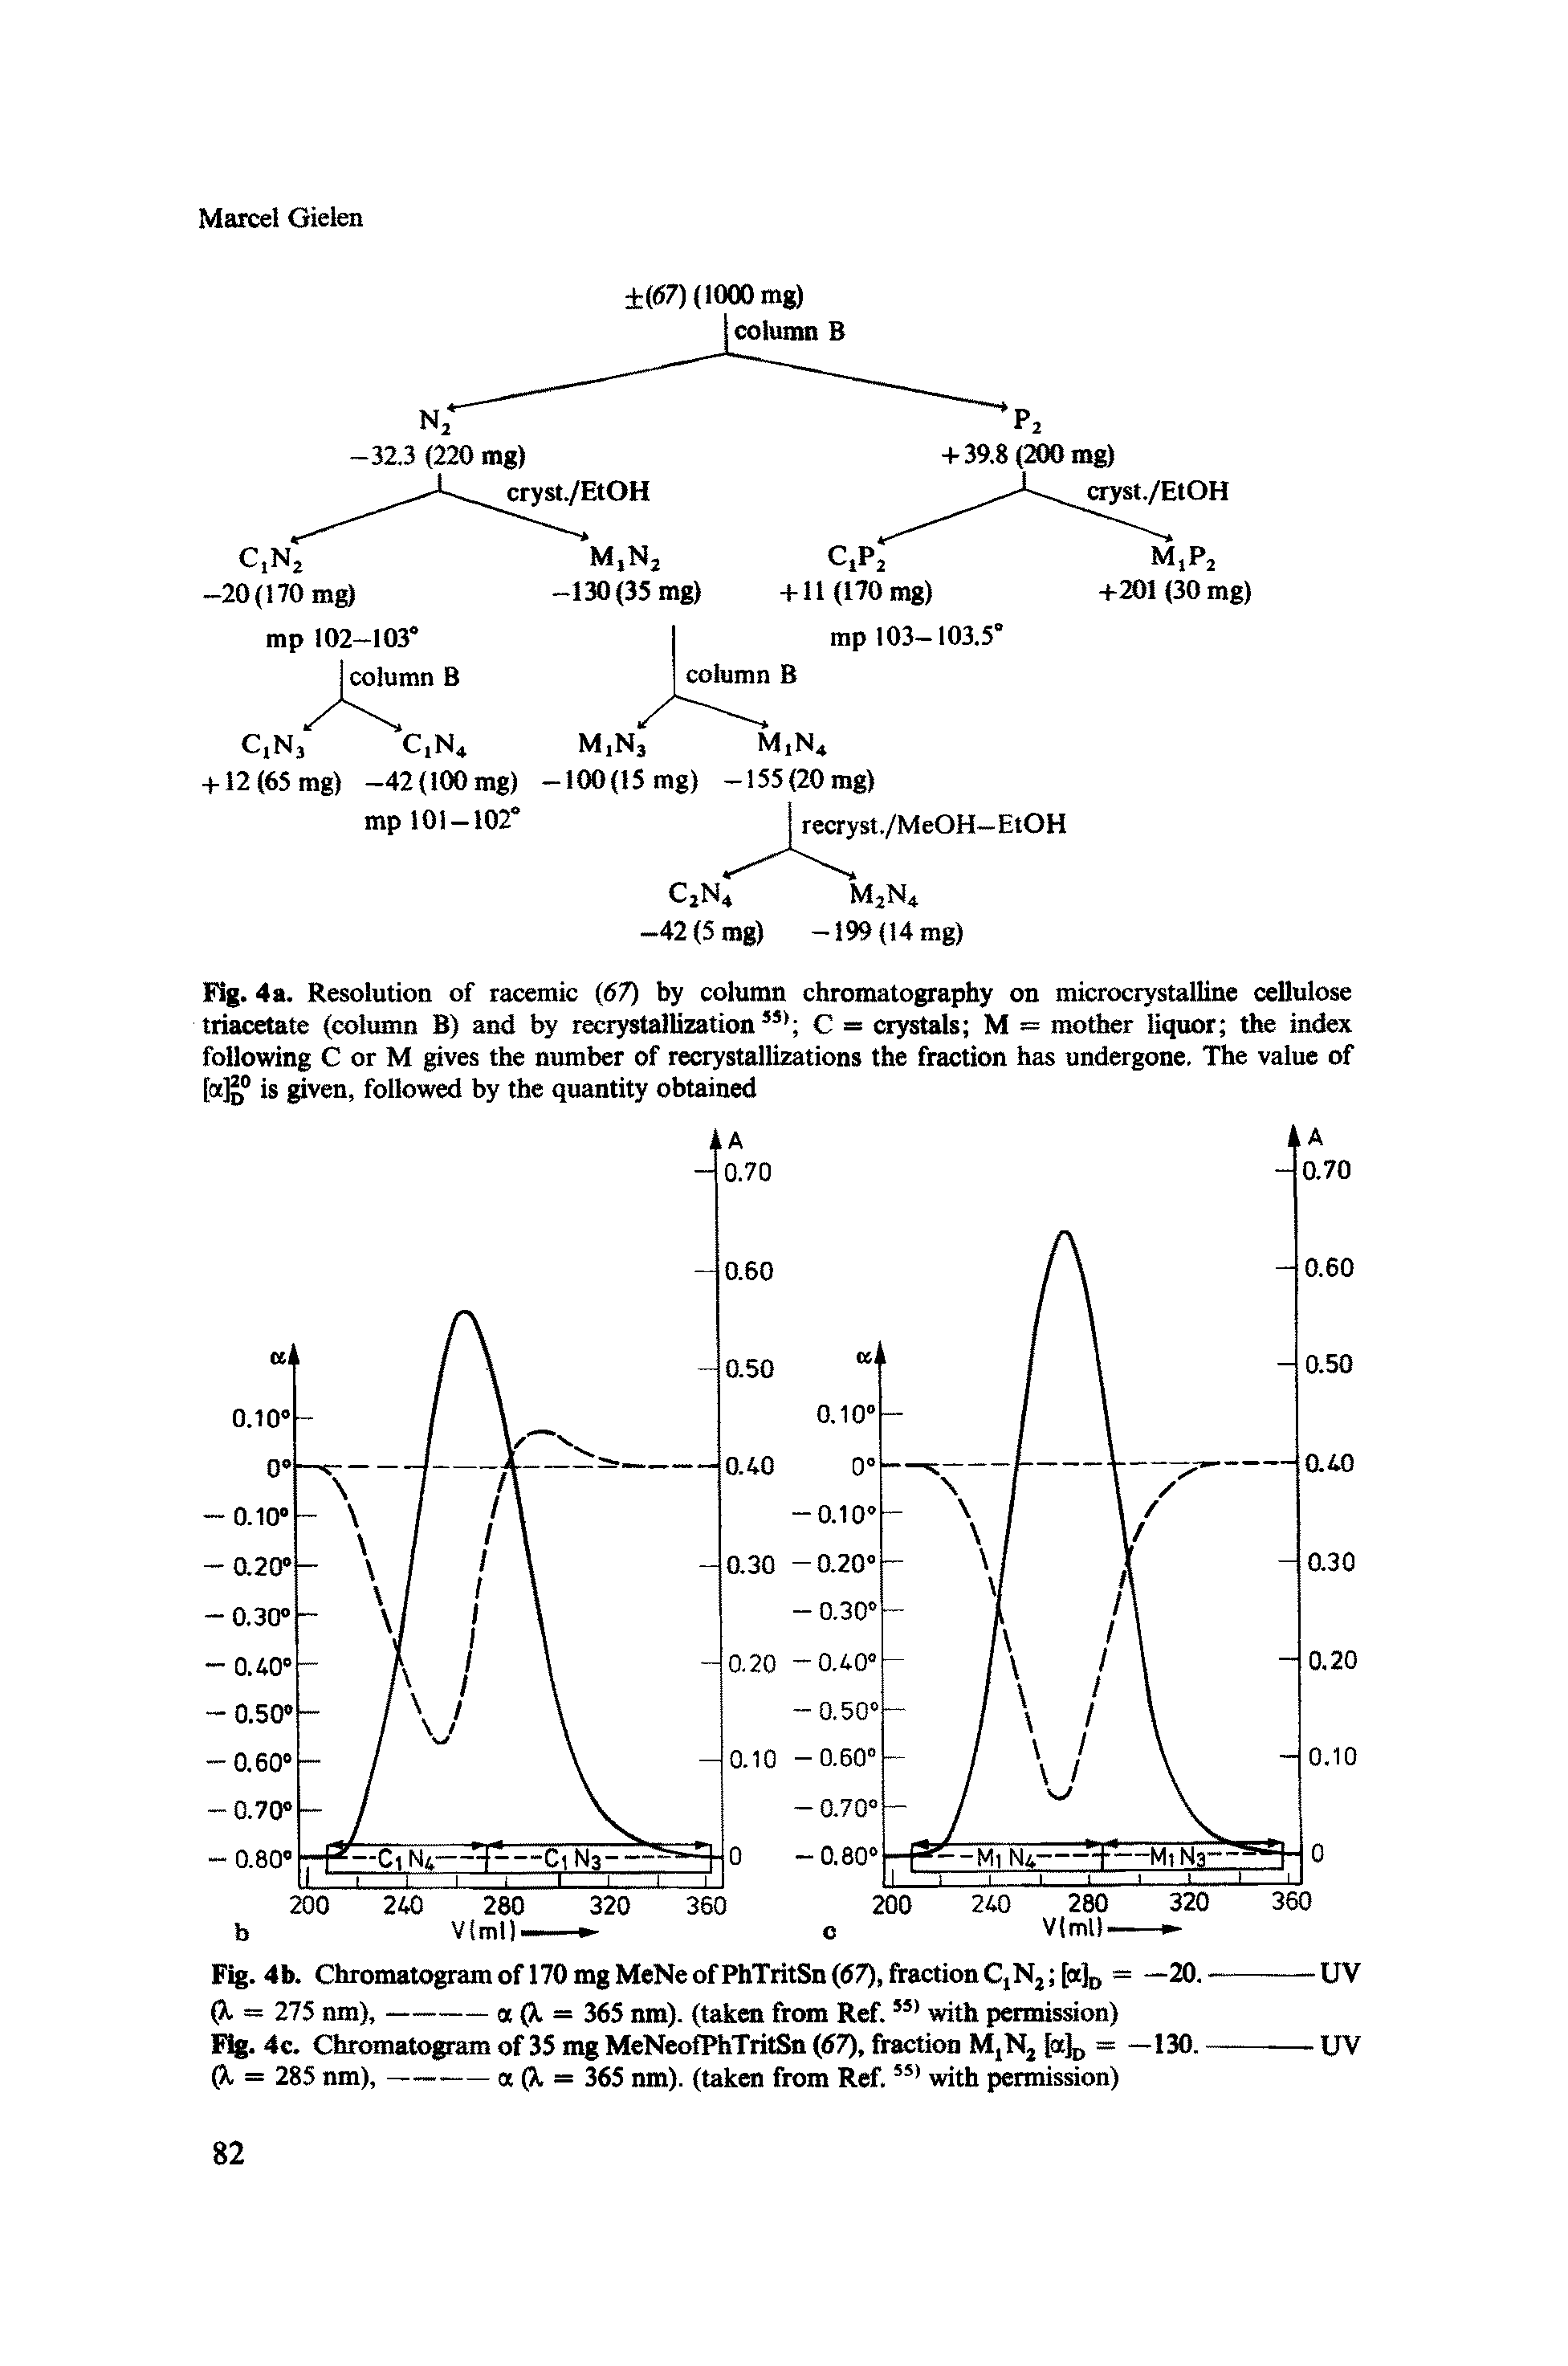 Fig. 4a. Resolution of racemic (67) by column chromatography on microcrystalline cellulose triacetate (column B) and by recrystallization 35) C = crystals M = mother liquor the index following C or M gives the number of recrystallizations the fraction has undergone. The value of [ot] ° is given, followed by the quantity obtained...